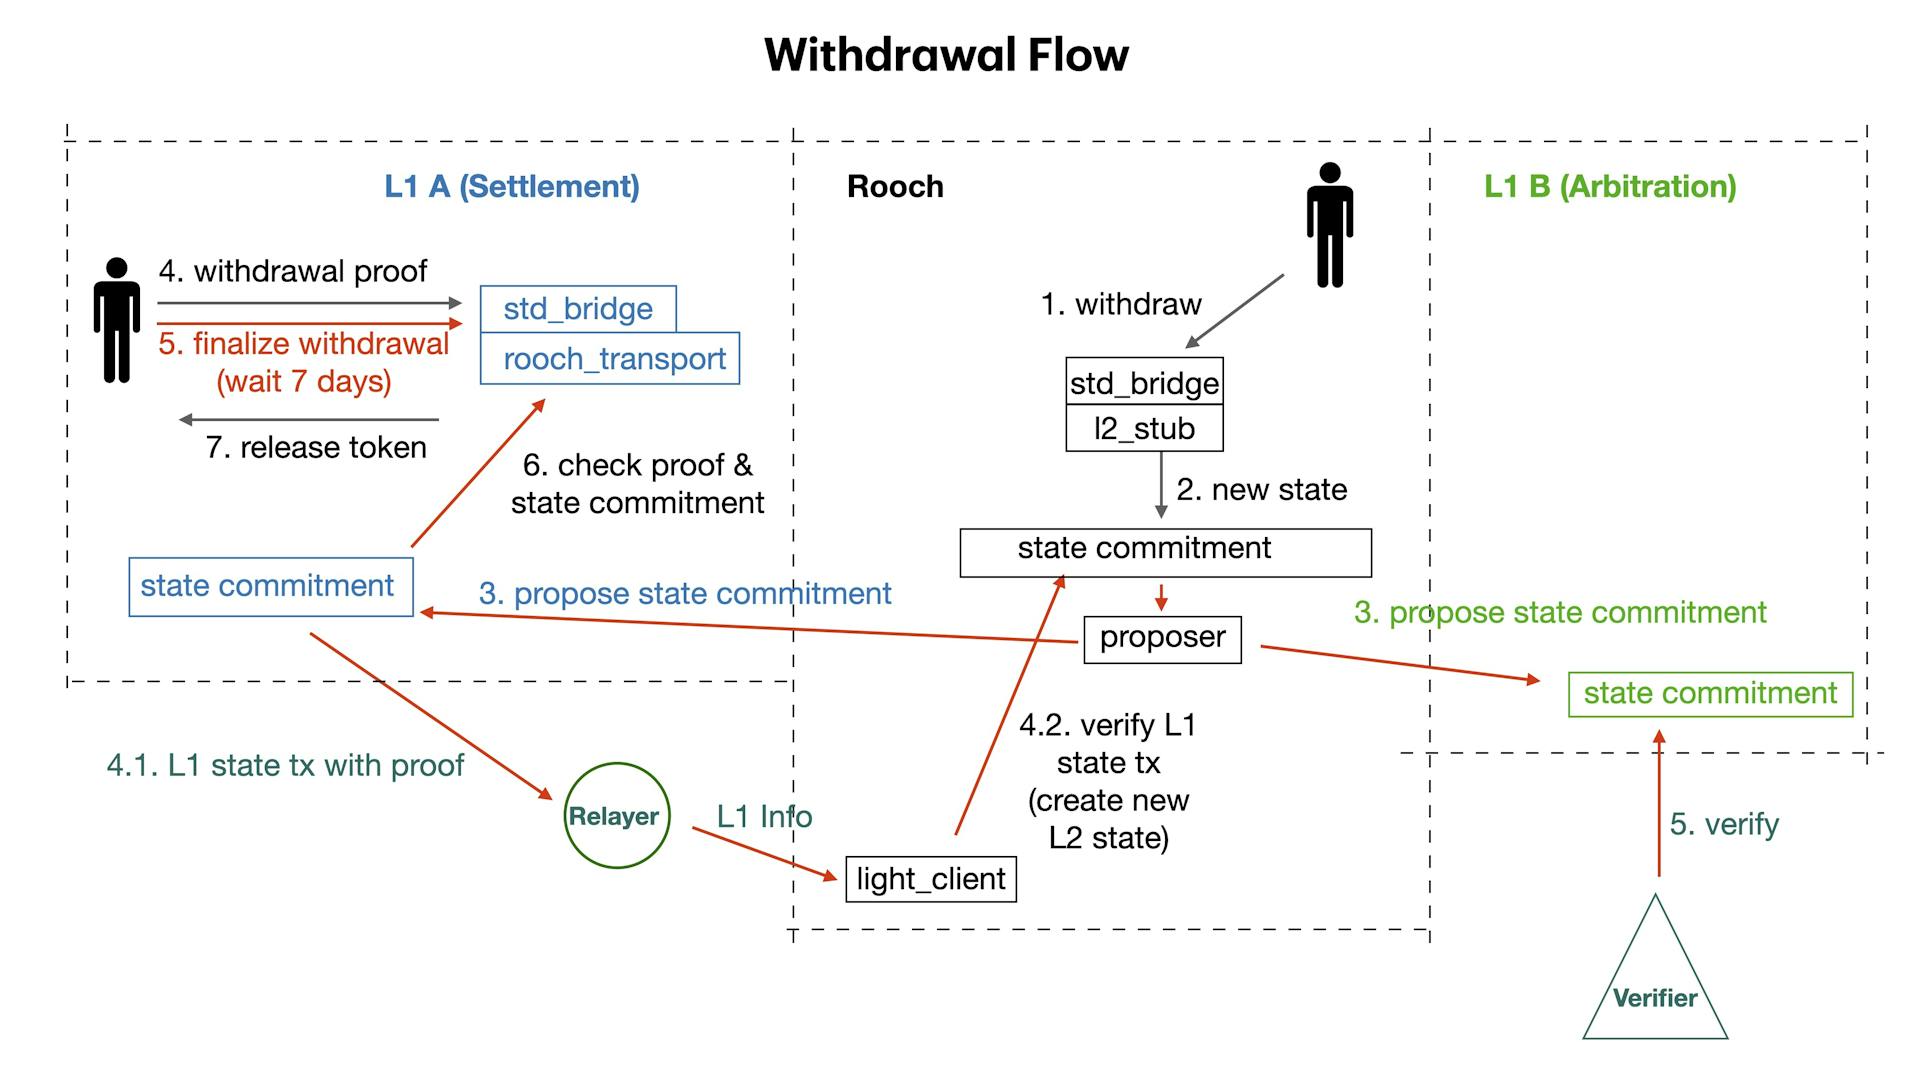 Rooch Multi-chain Settlement Withdrawal Flow